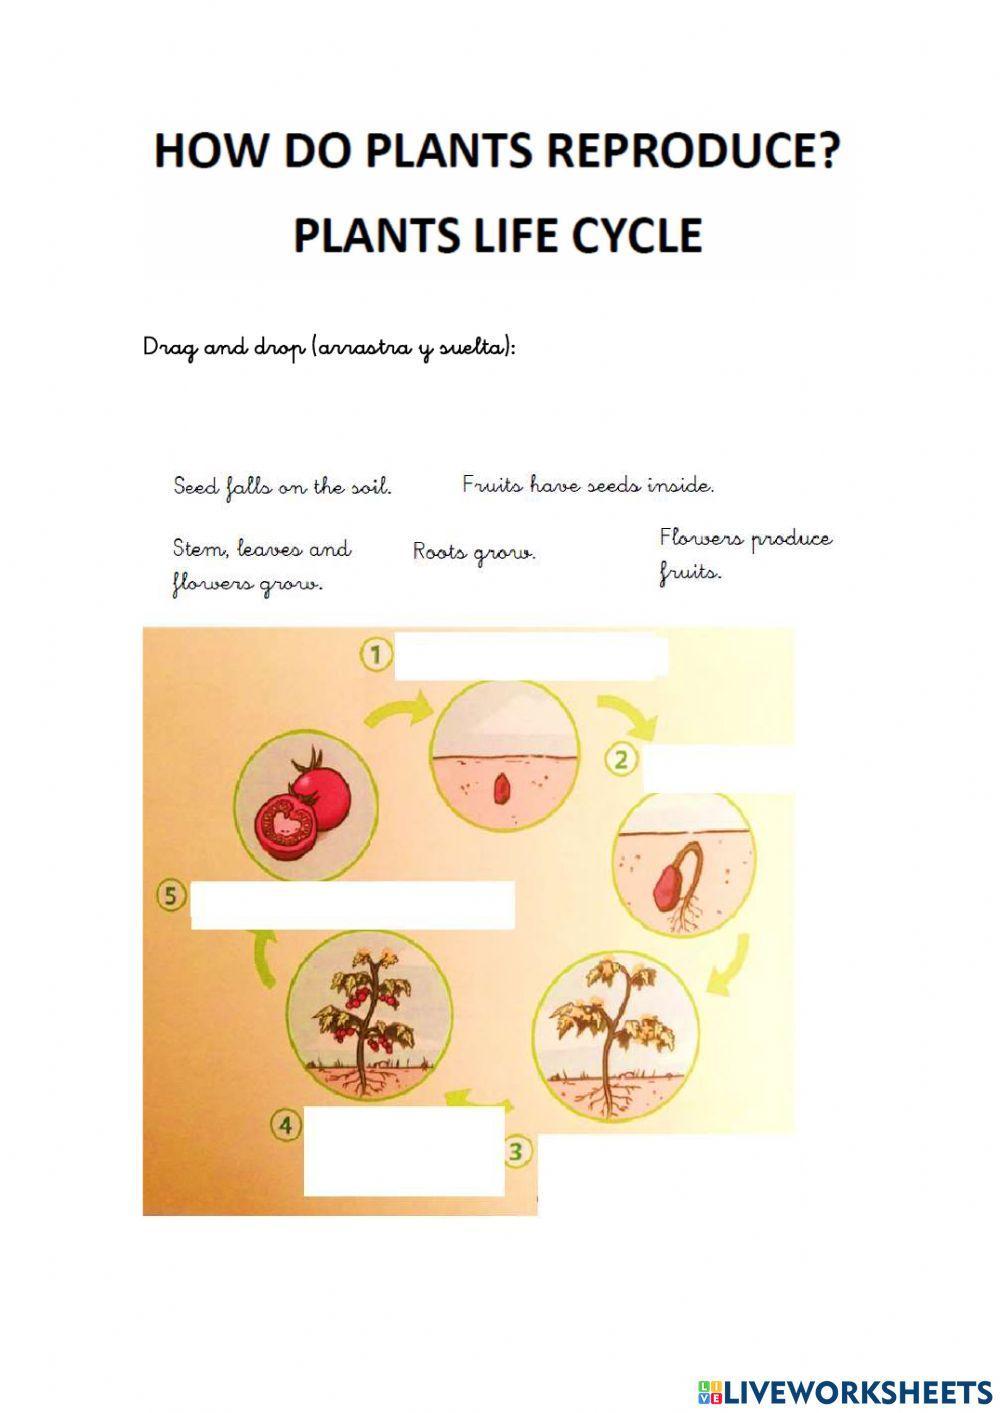 How do plants reproduce? Life cycle of a plant